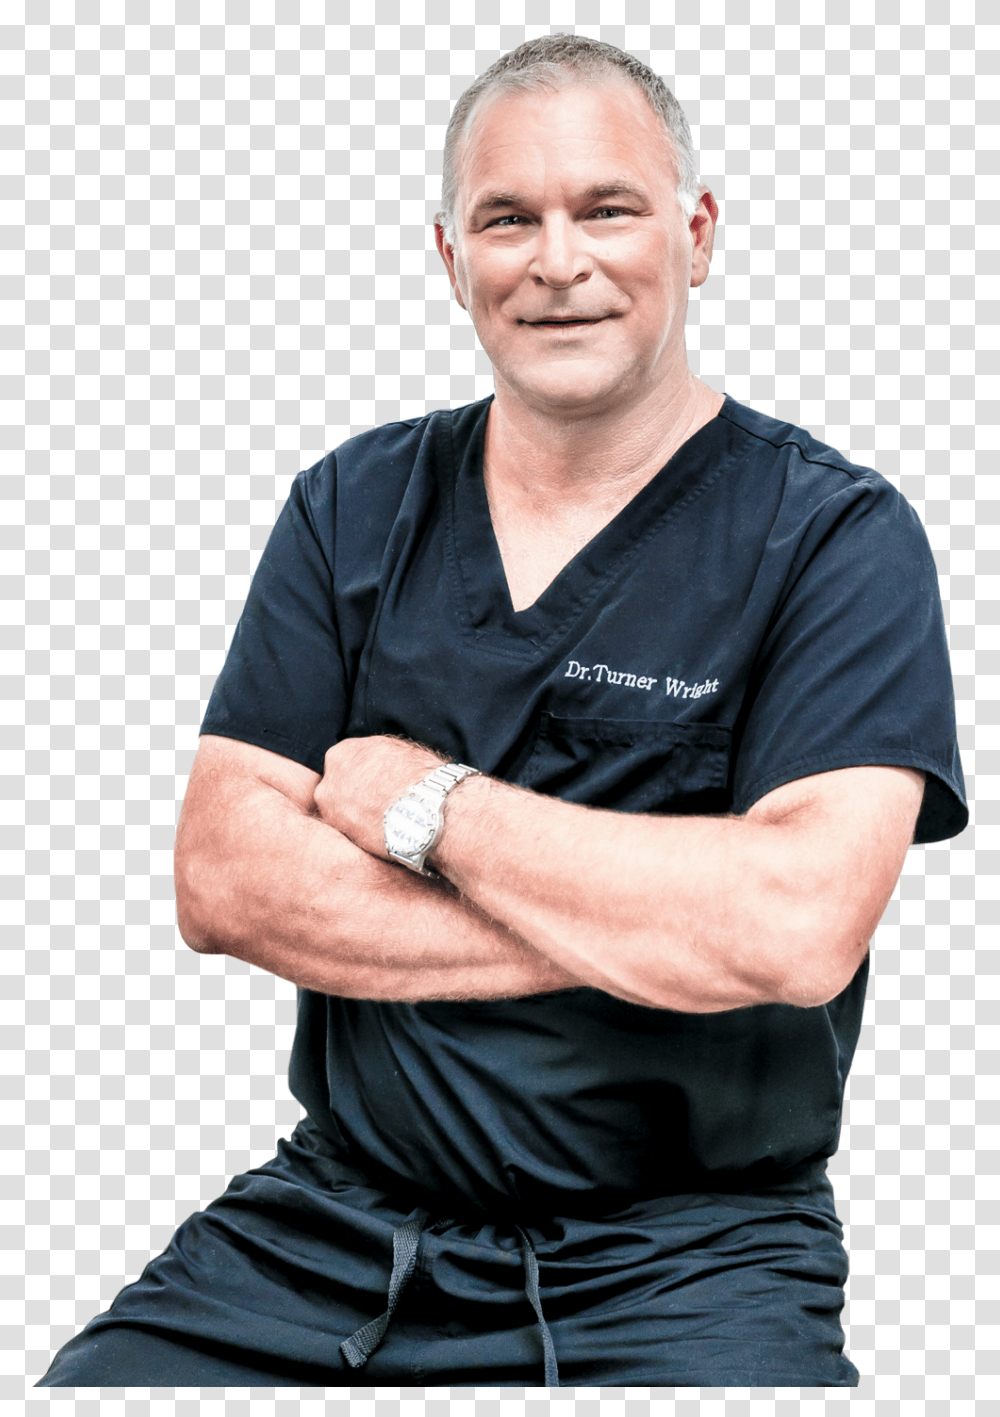 Dr Turner Wright Sitting, Person, Human, Doctor, Surgeon Transparent Png